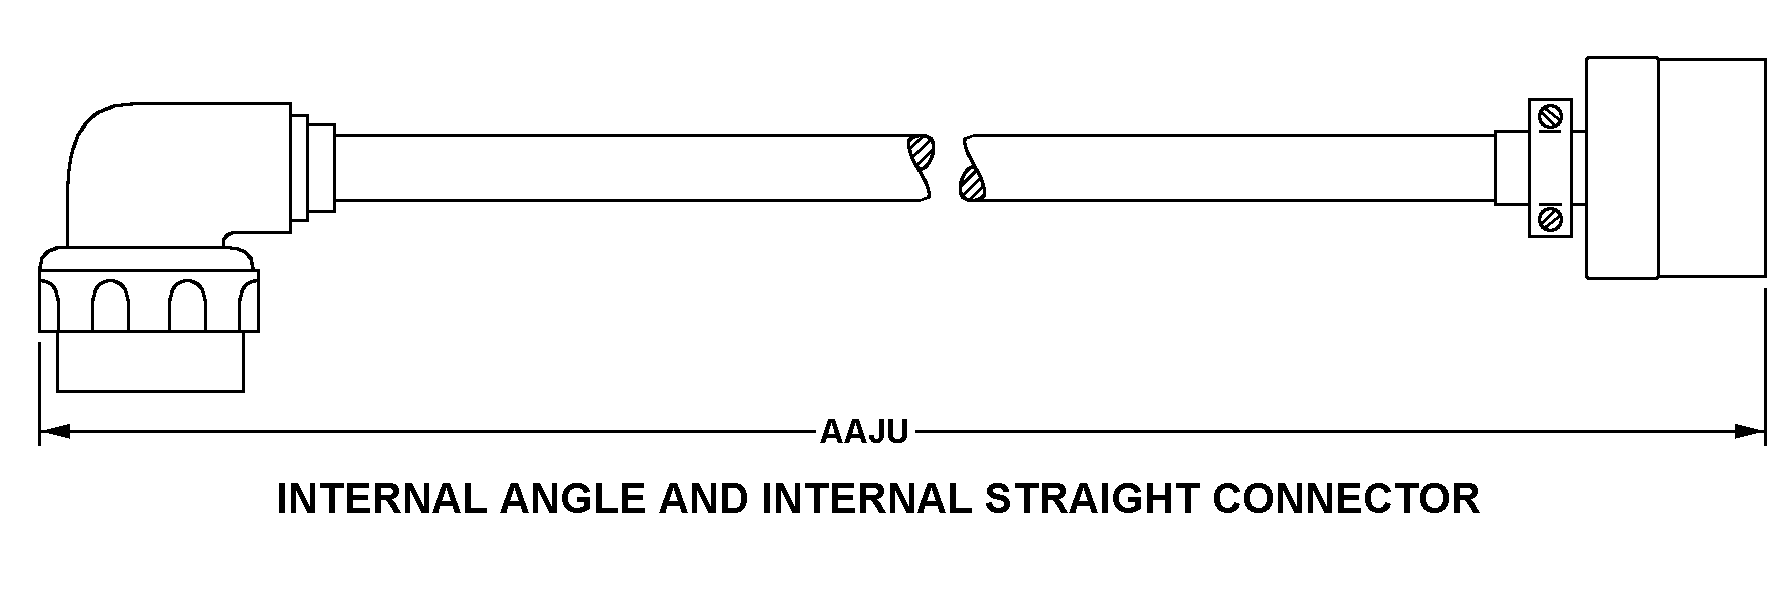 INTERNAL ANGLE AND INTERNAL STRAIGHT CONNECTOR style nsn 6150-01-207-3159